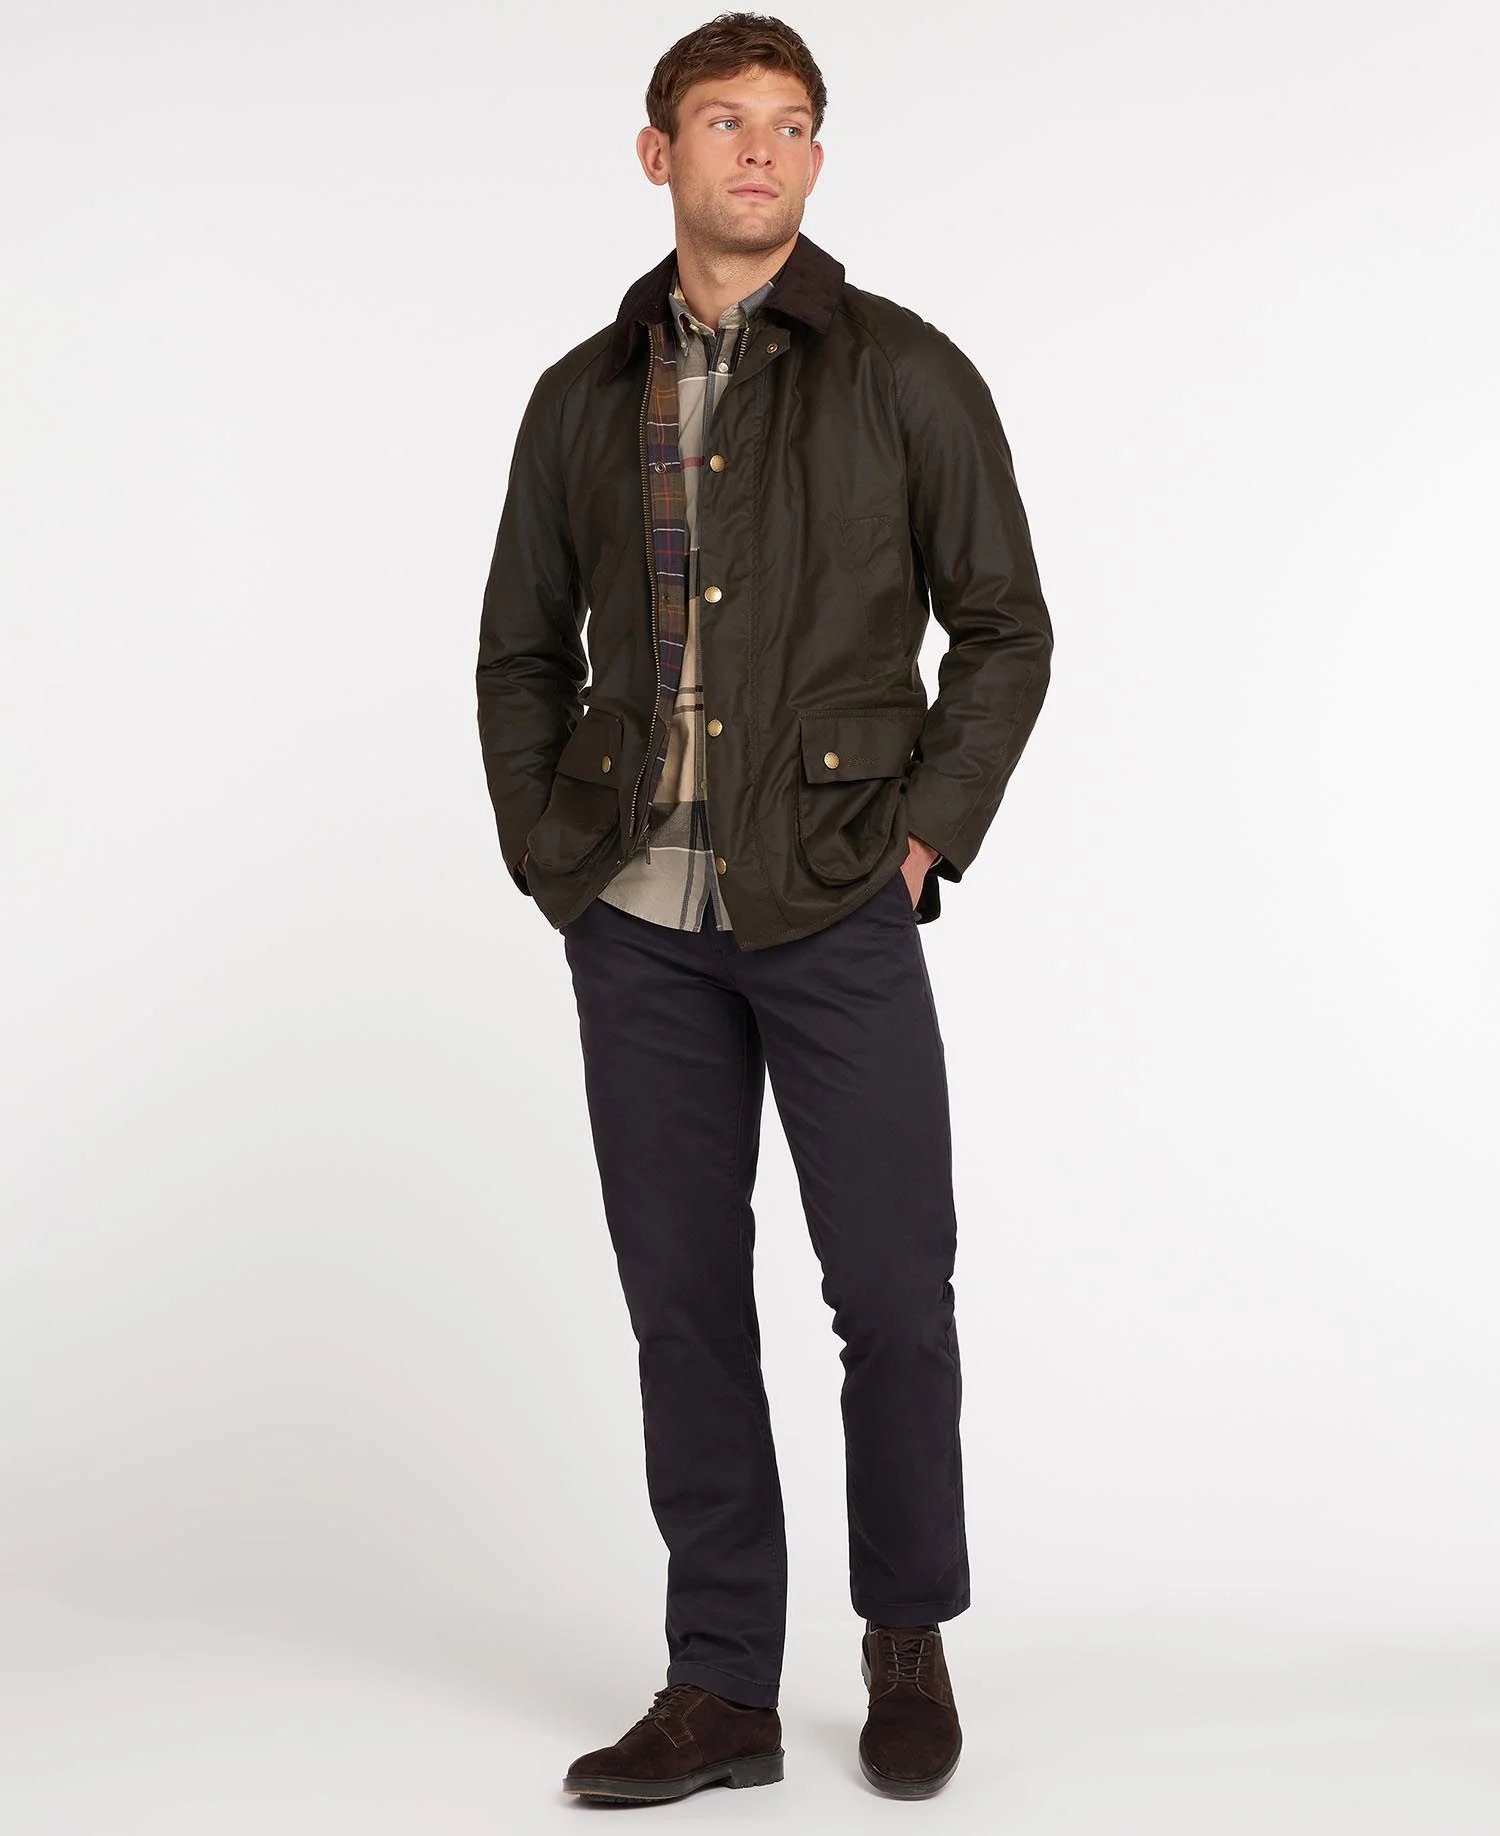 The Iconic Ashby Barbour Jacket – The QG